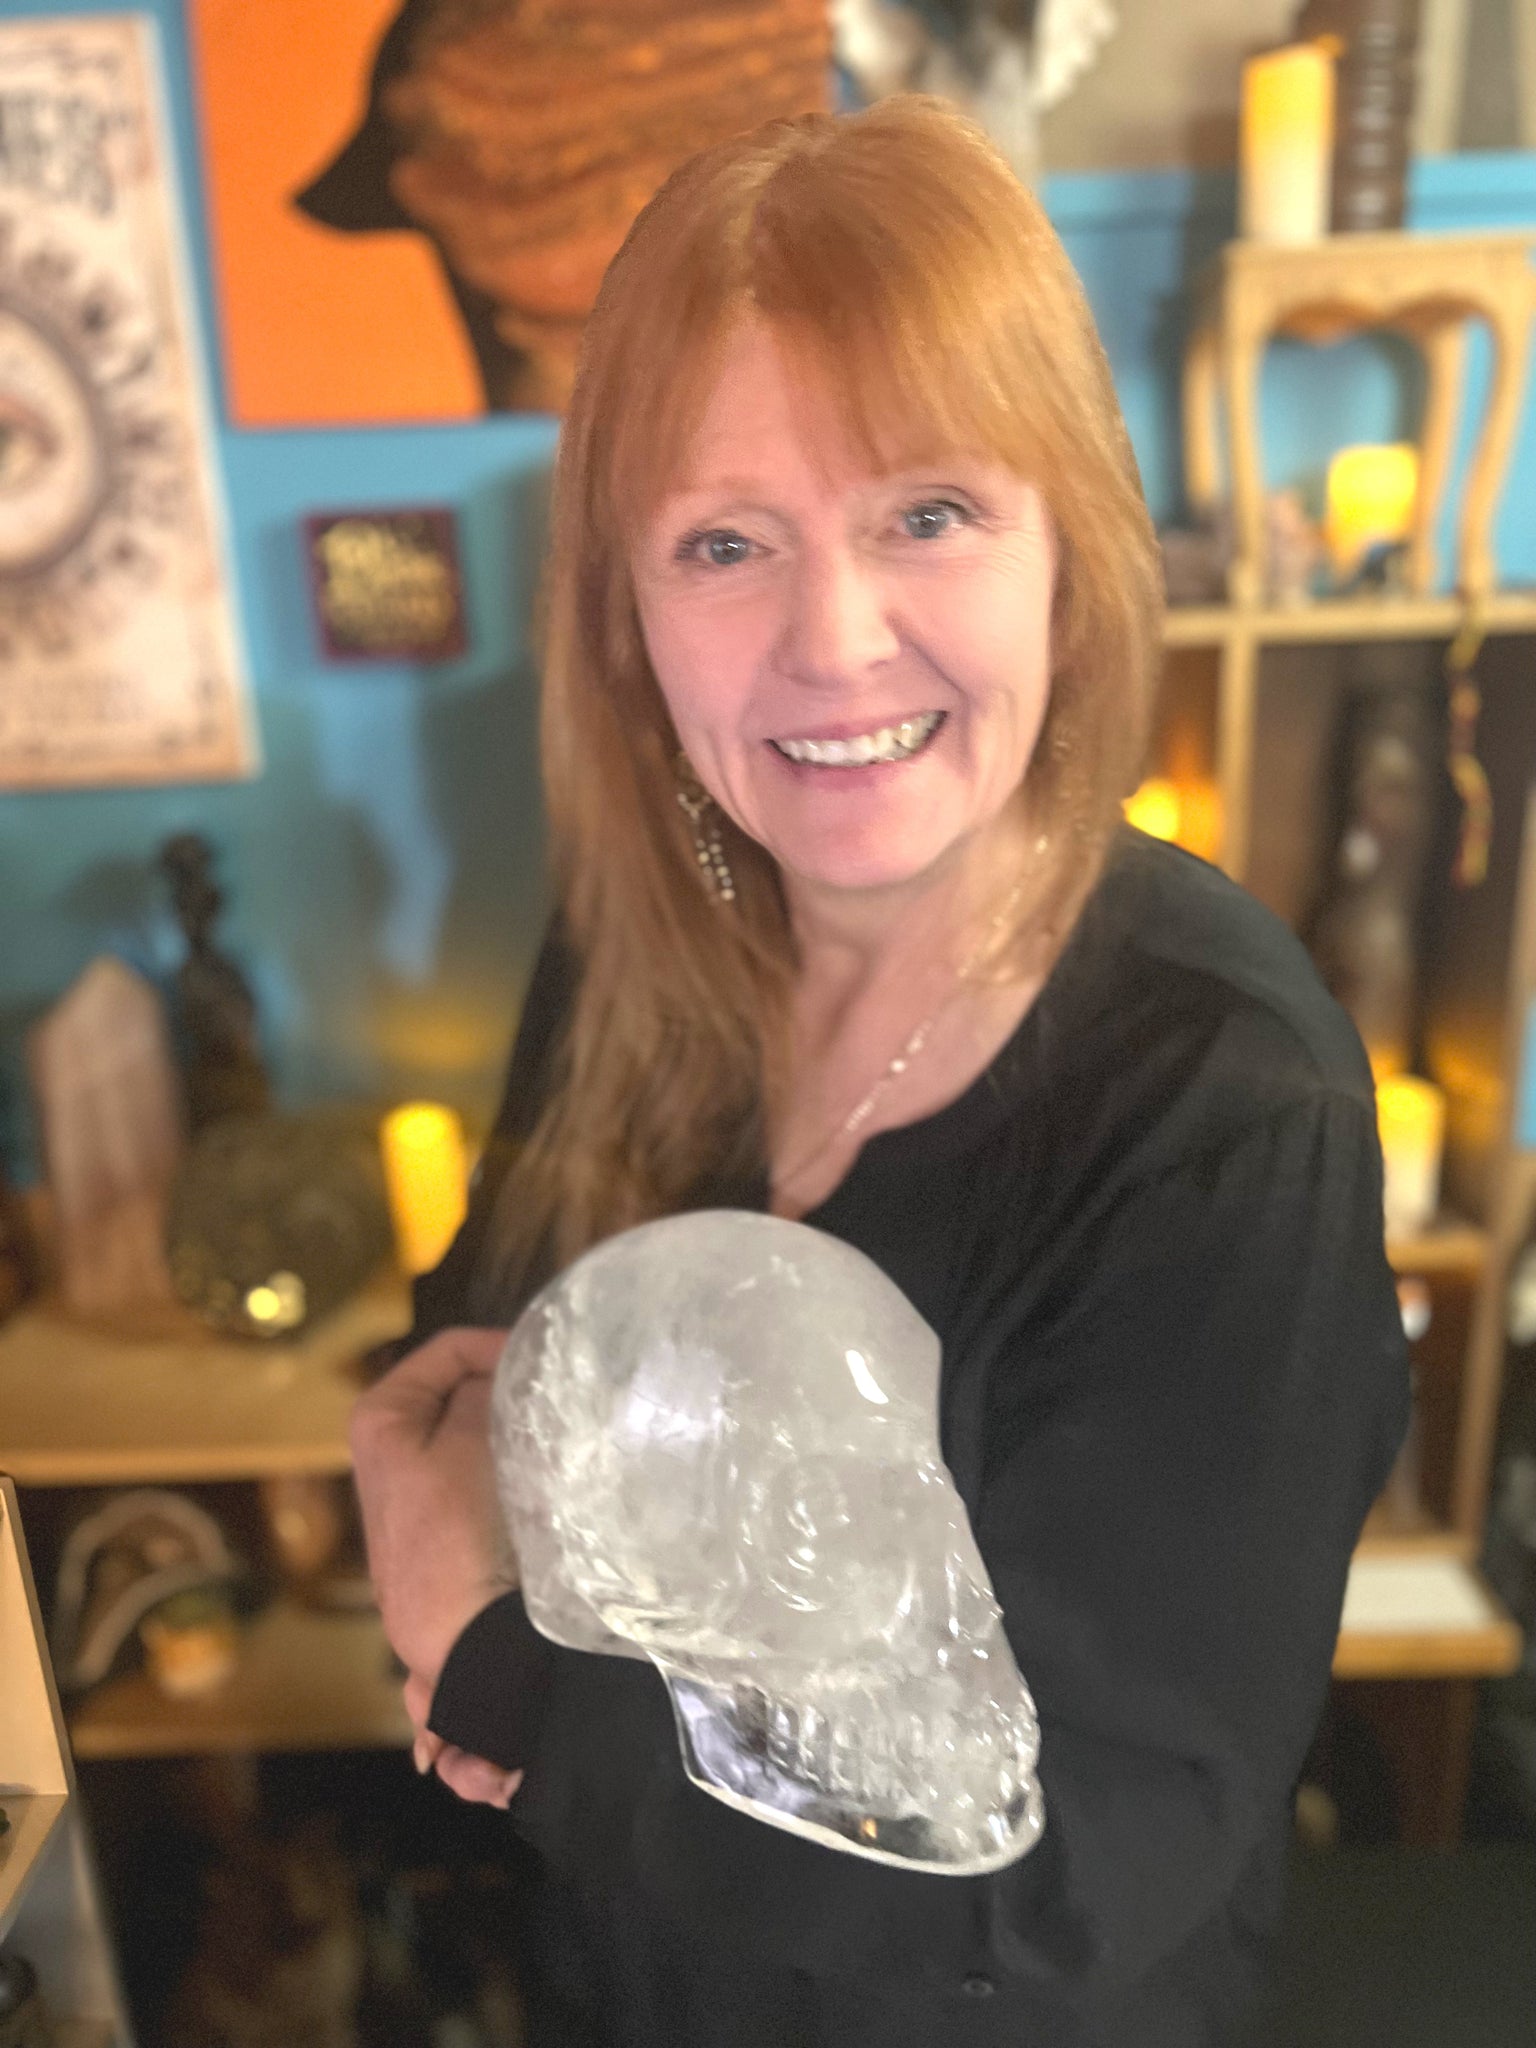 Access the Power of a Crystal Skull!